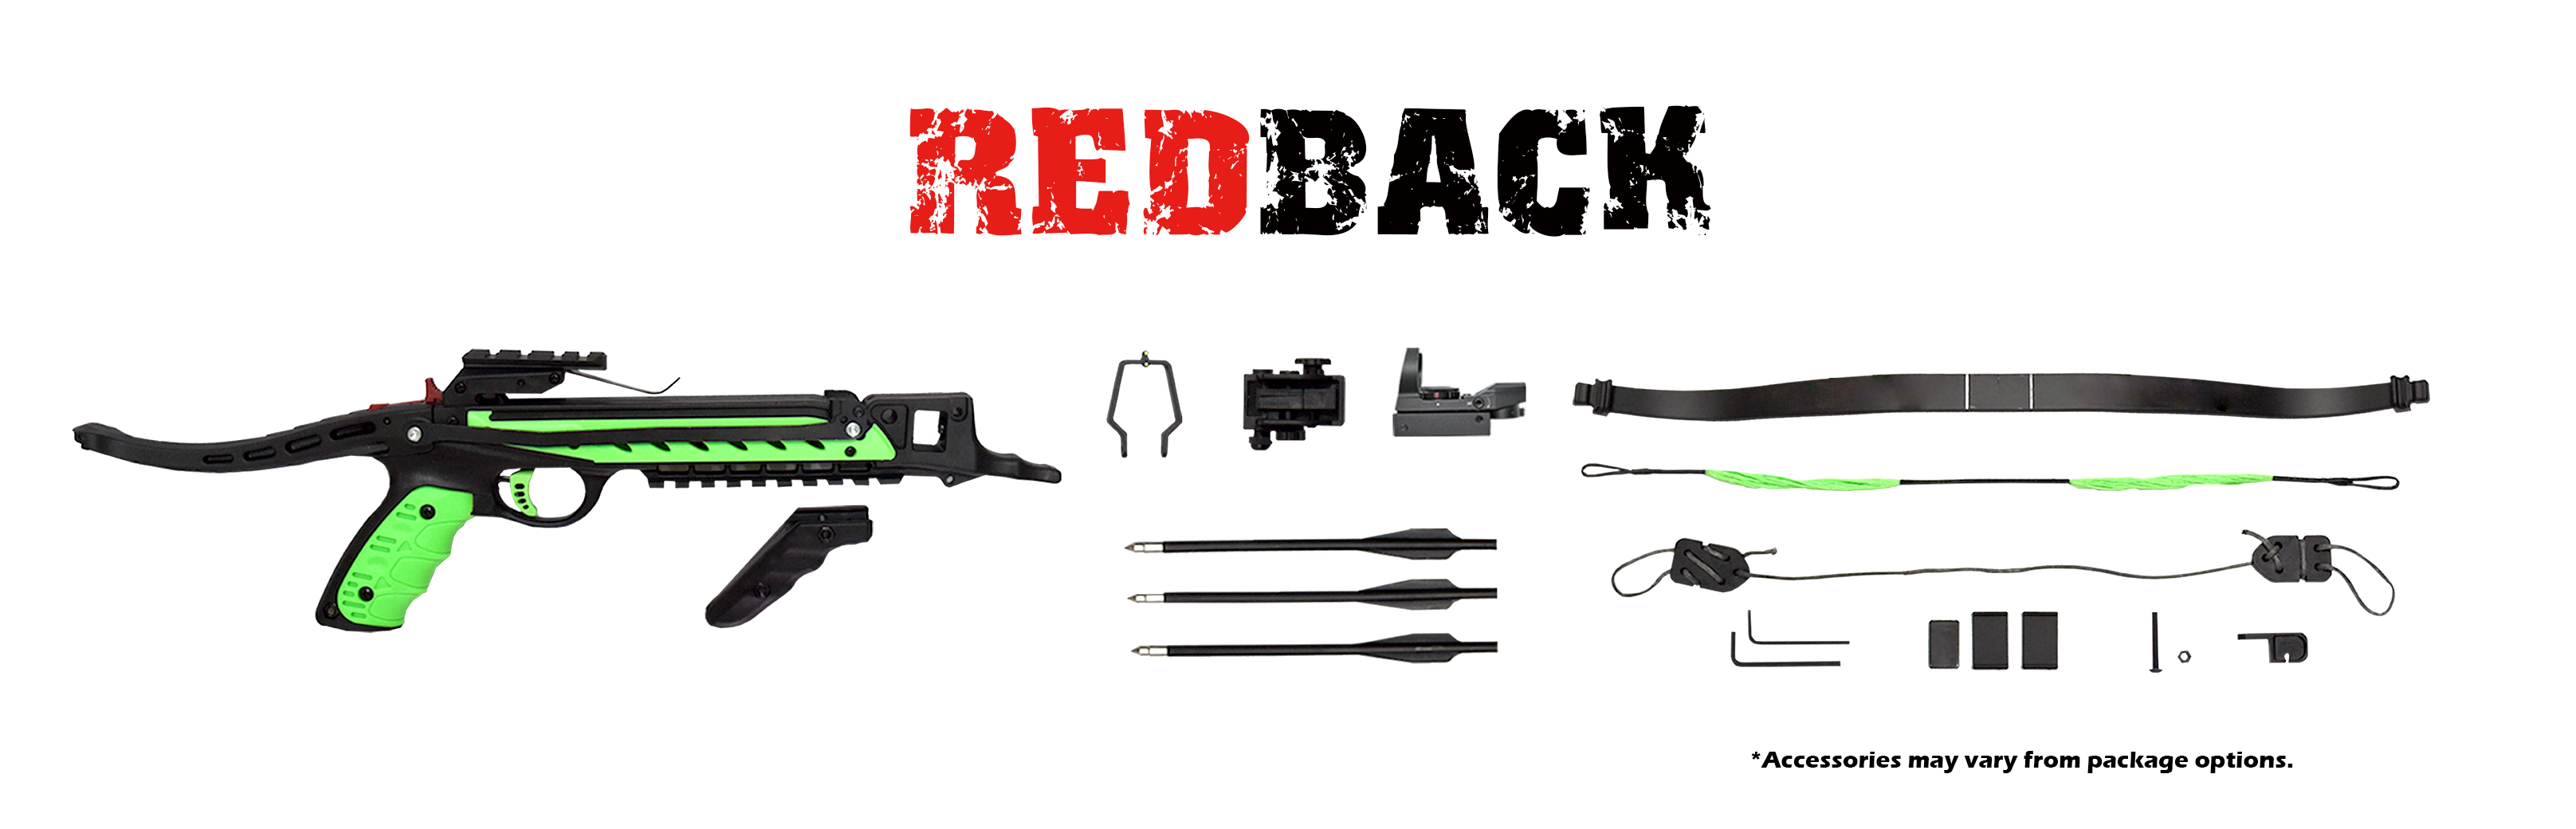 /archive/product/item/images/REDBACK/REDBACK-4.png